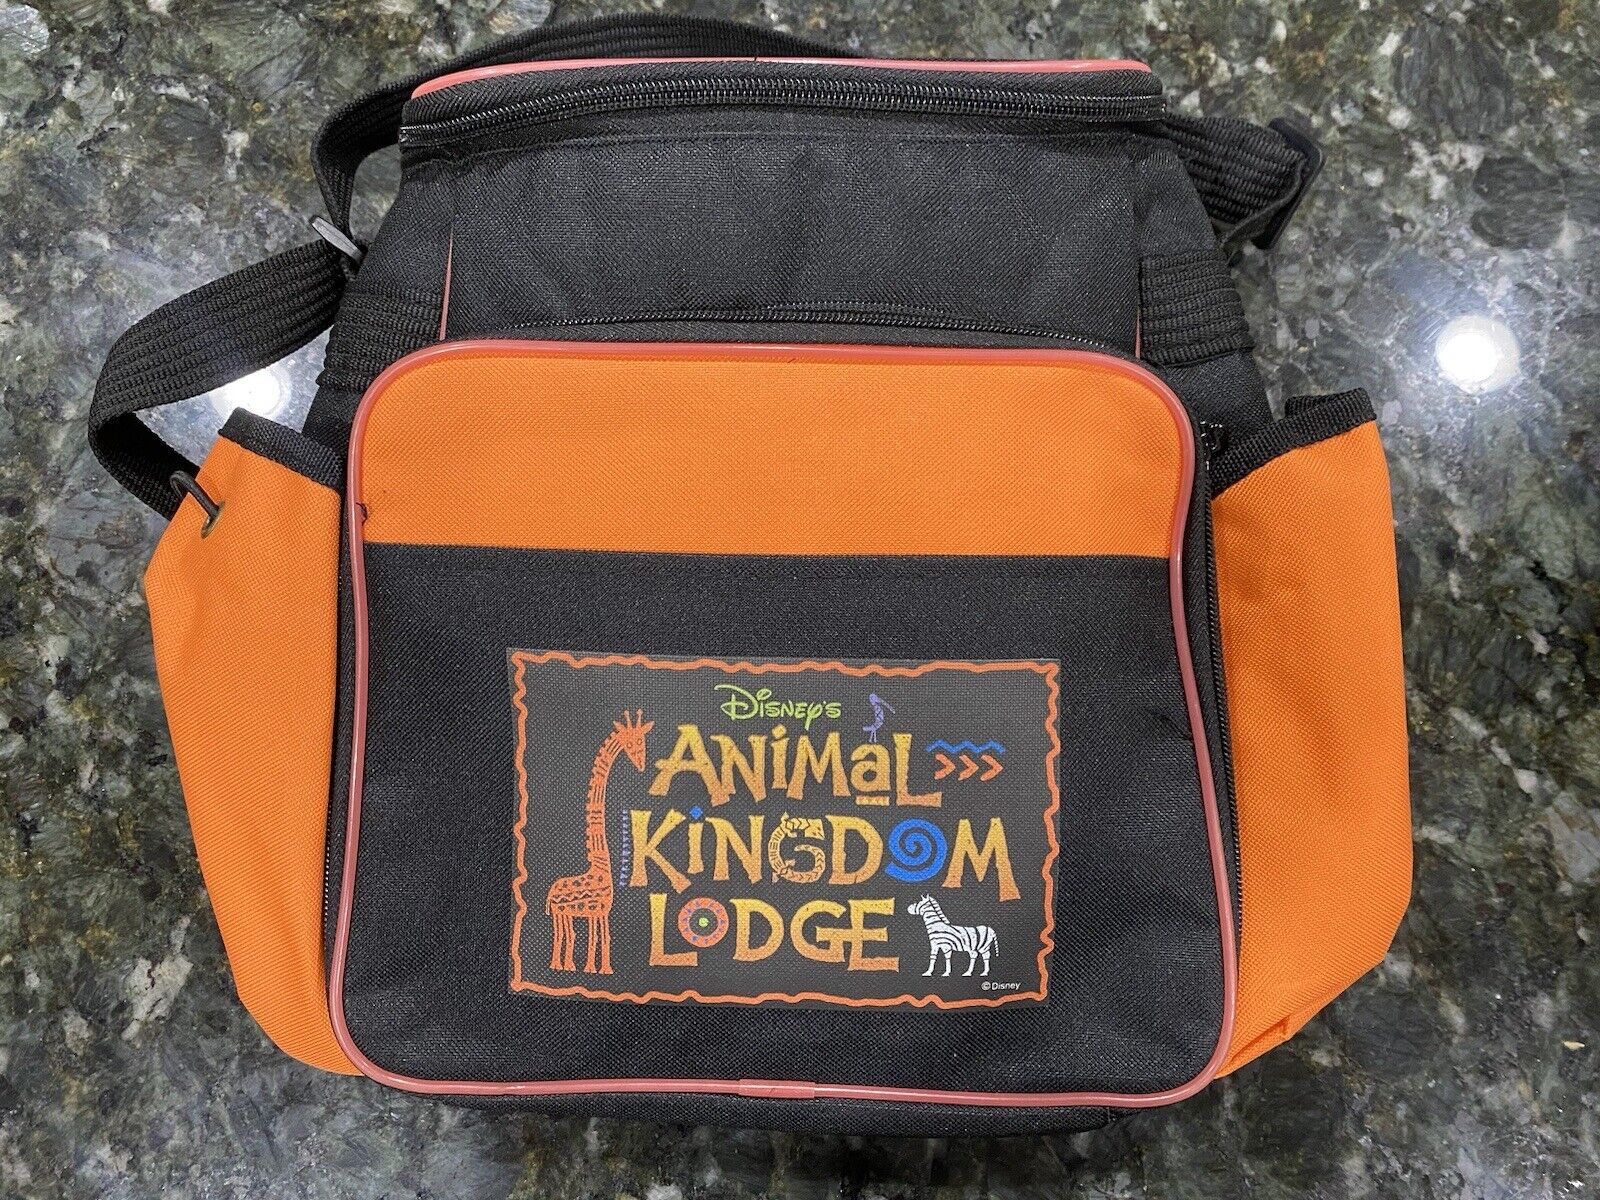 Disney\'s Animal Kingdom Lodge Lunchtote Insulated Collectible Rare Vtg